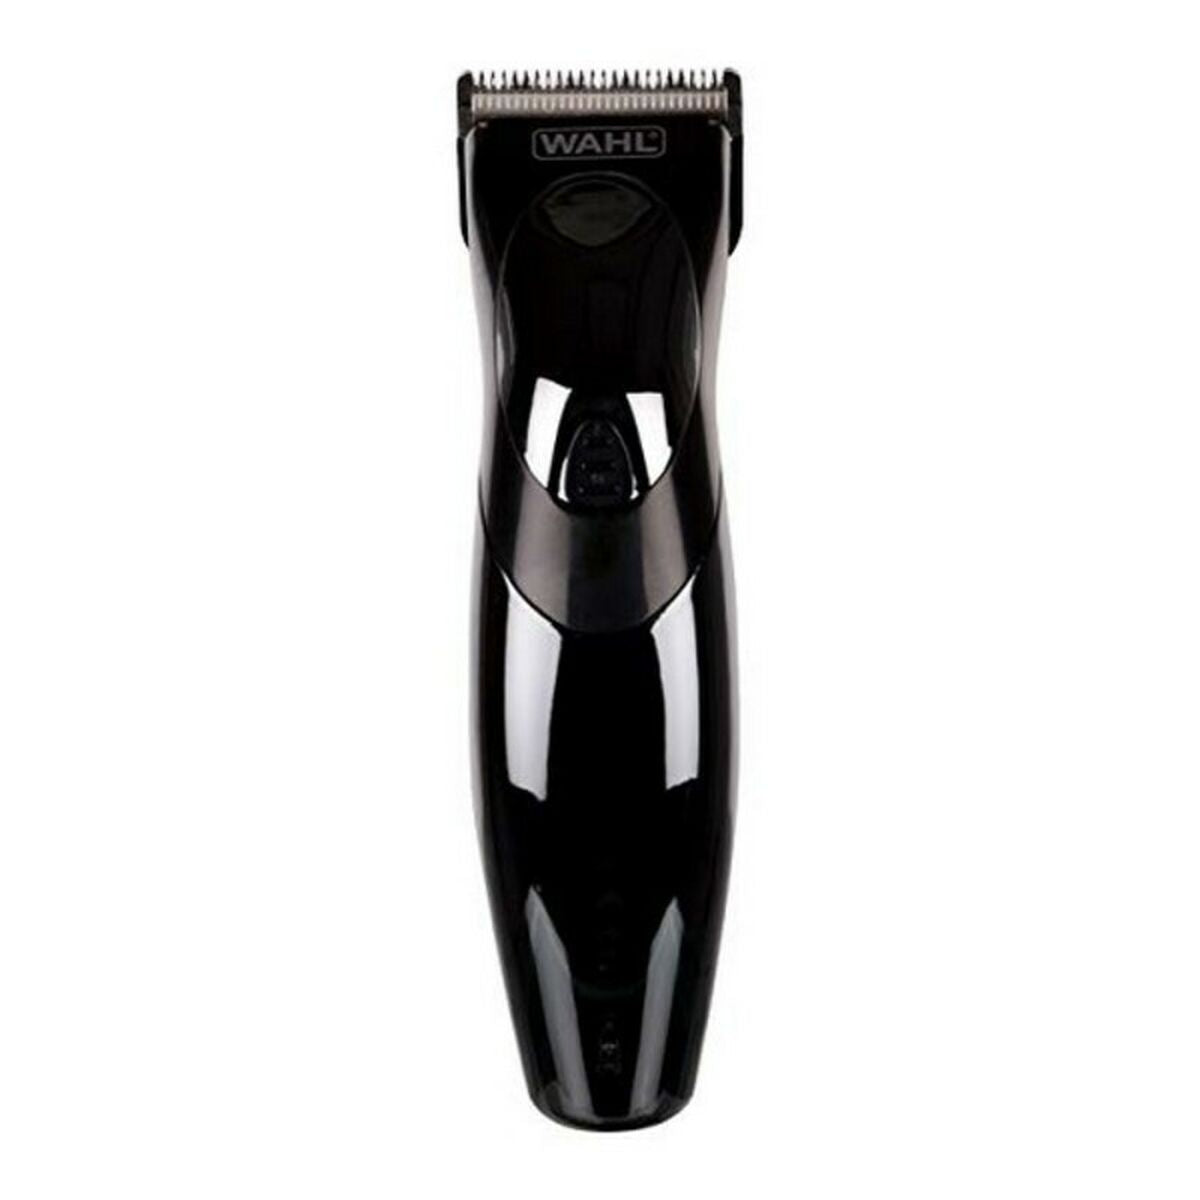 Hair Clippers Wahl 9639-816 Black